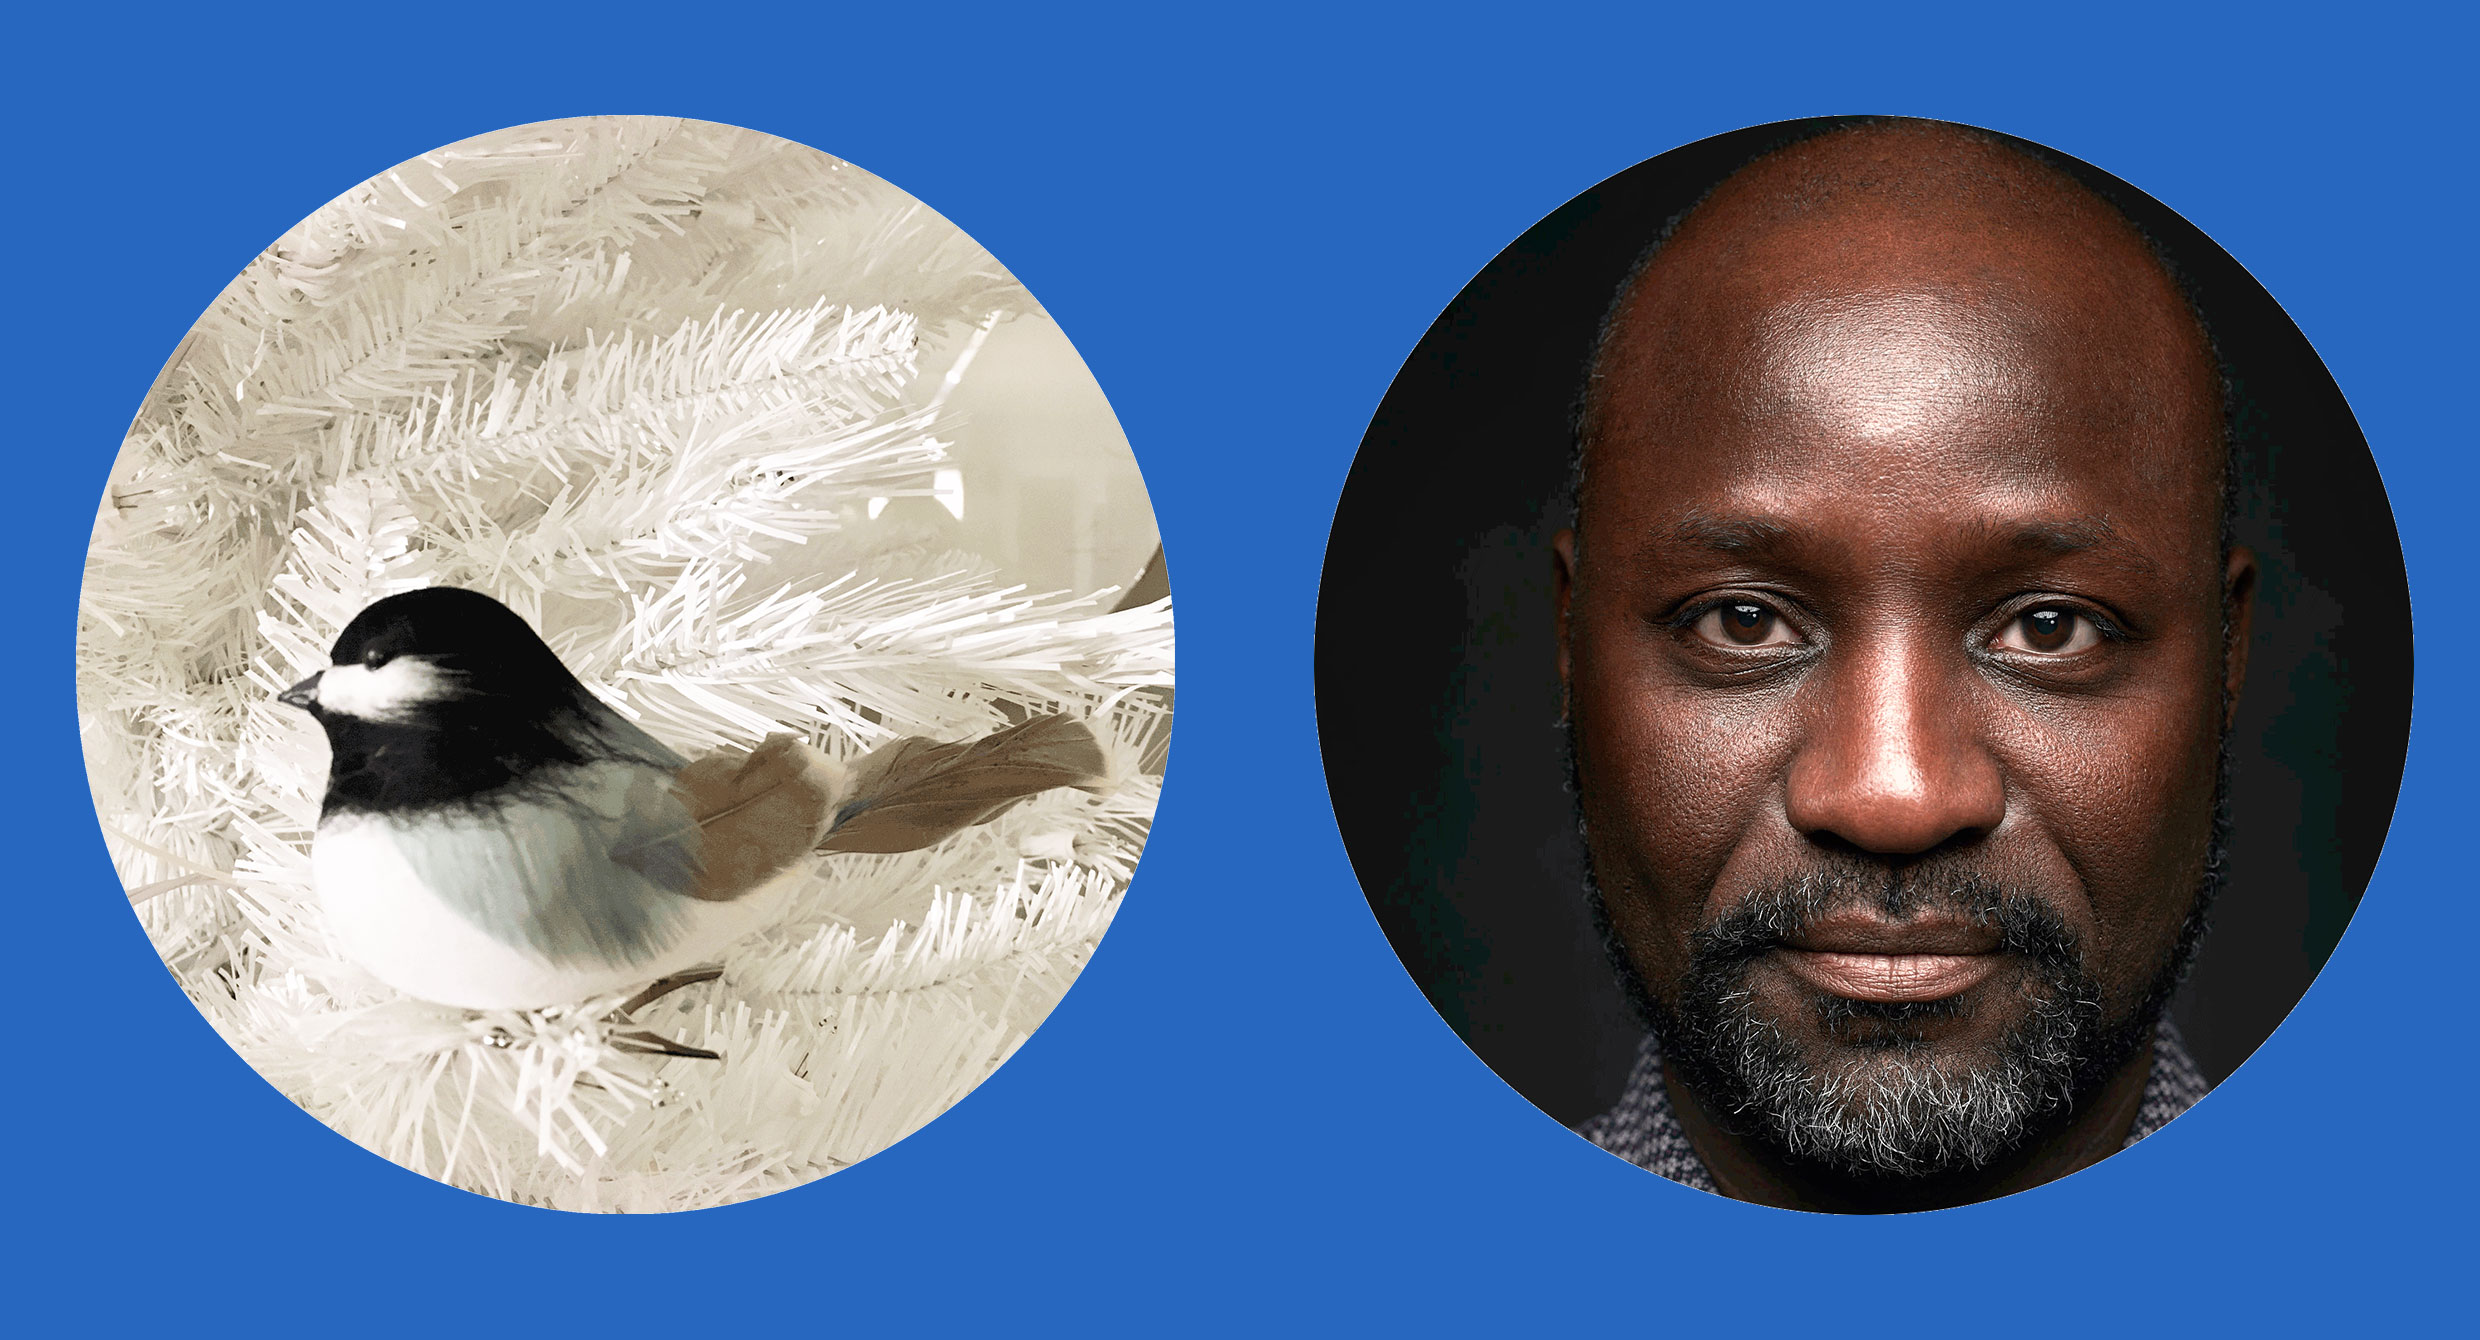 Two circular head shots placed side-by-side on deep blue patterned background. Left: A small bird with dark feathers around the head, a mix of grey and taupe feathers along the wings, and an ivory feathered breast perches on a white evergreen tree. Right: Man with shaved head and salt-and-pepper coloured beard looks directly into the camera. He is not smiling but his eyes reflect a combination of bemusement, weariness, and light. The collar of his button-up shirt can be seen slightly. 